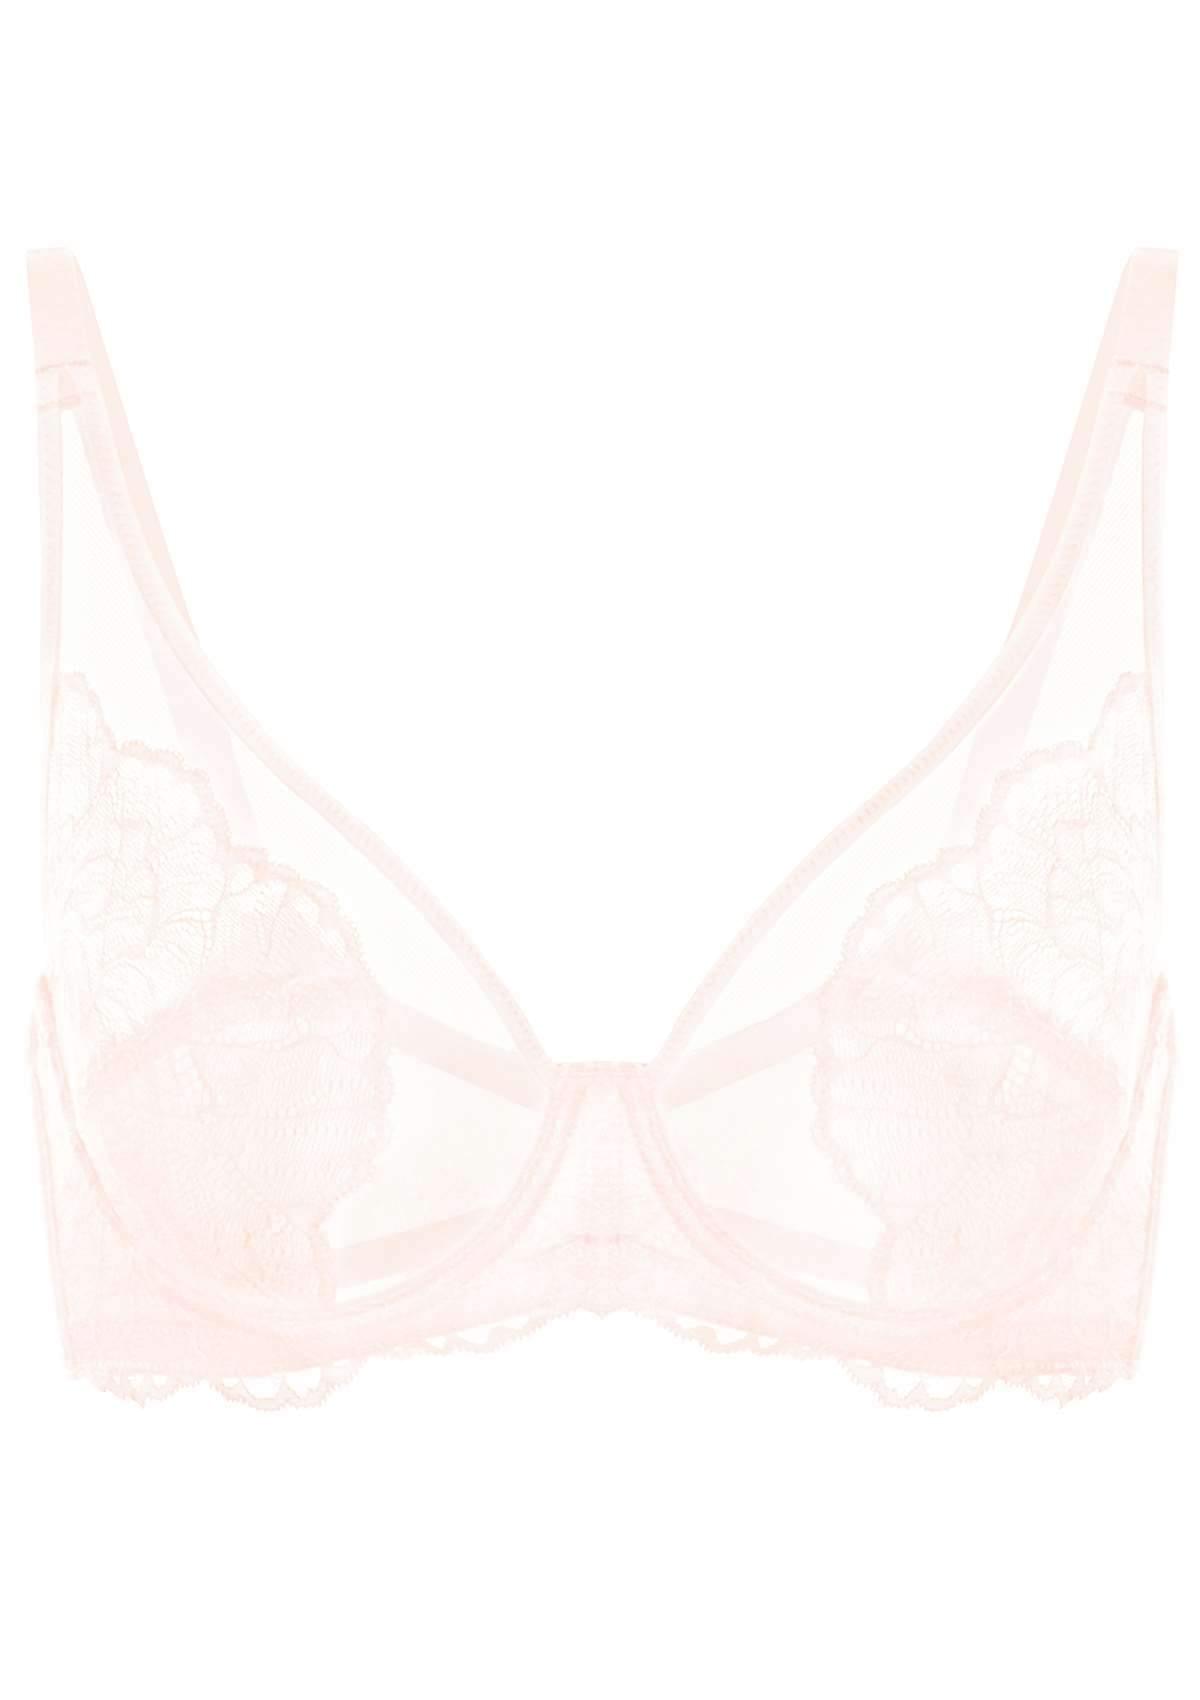 HSIA Blossom Matching Lacey Underwear And Bra Set: Sexy Lace Bra - Dusty Peach / 44 / H